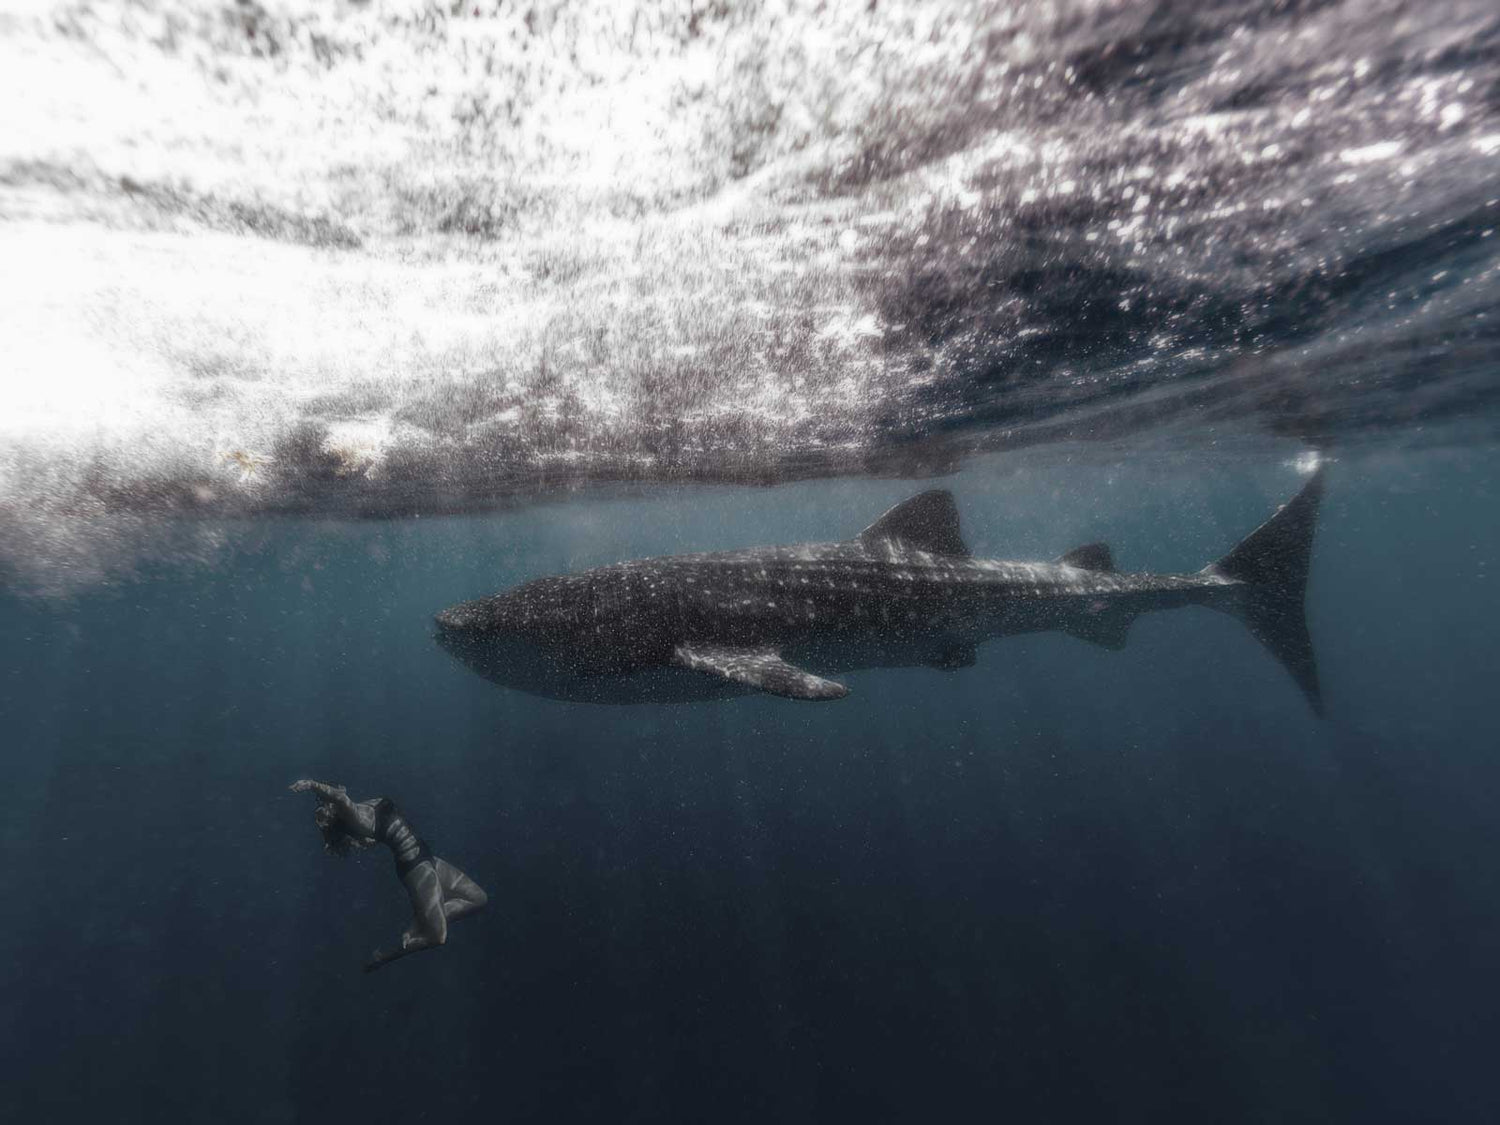 Top Tips for an Awesome Whale Shark Encounter